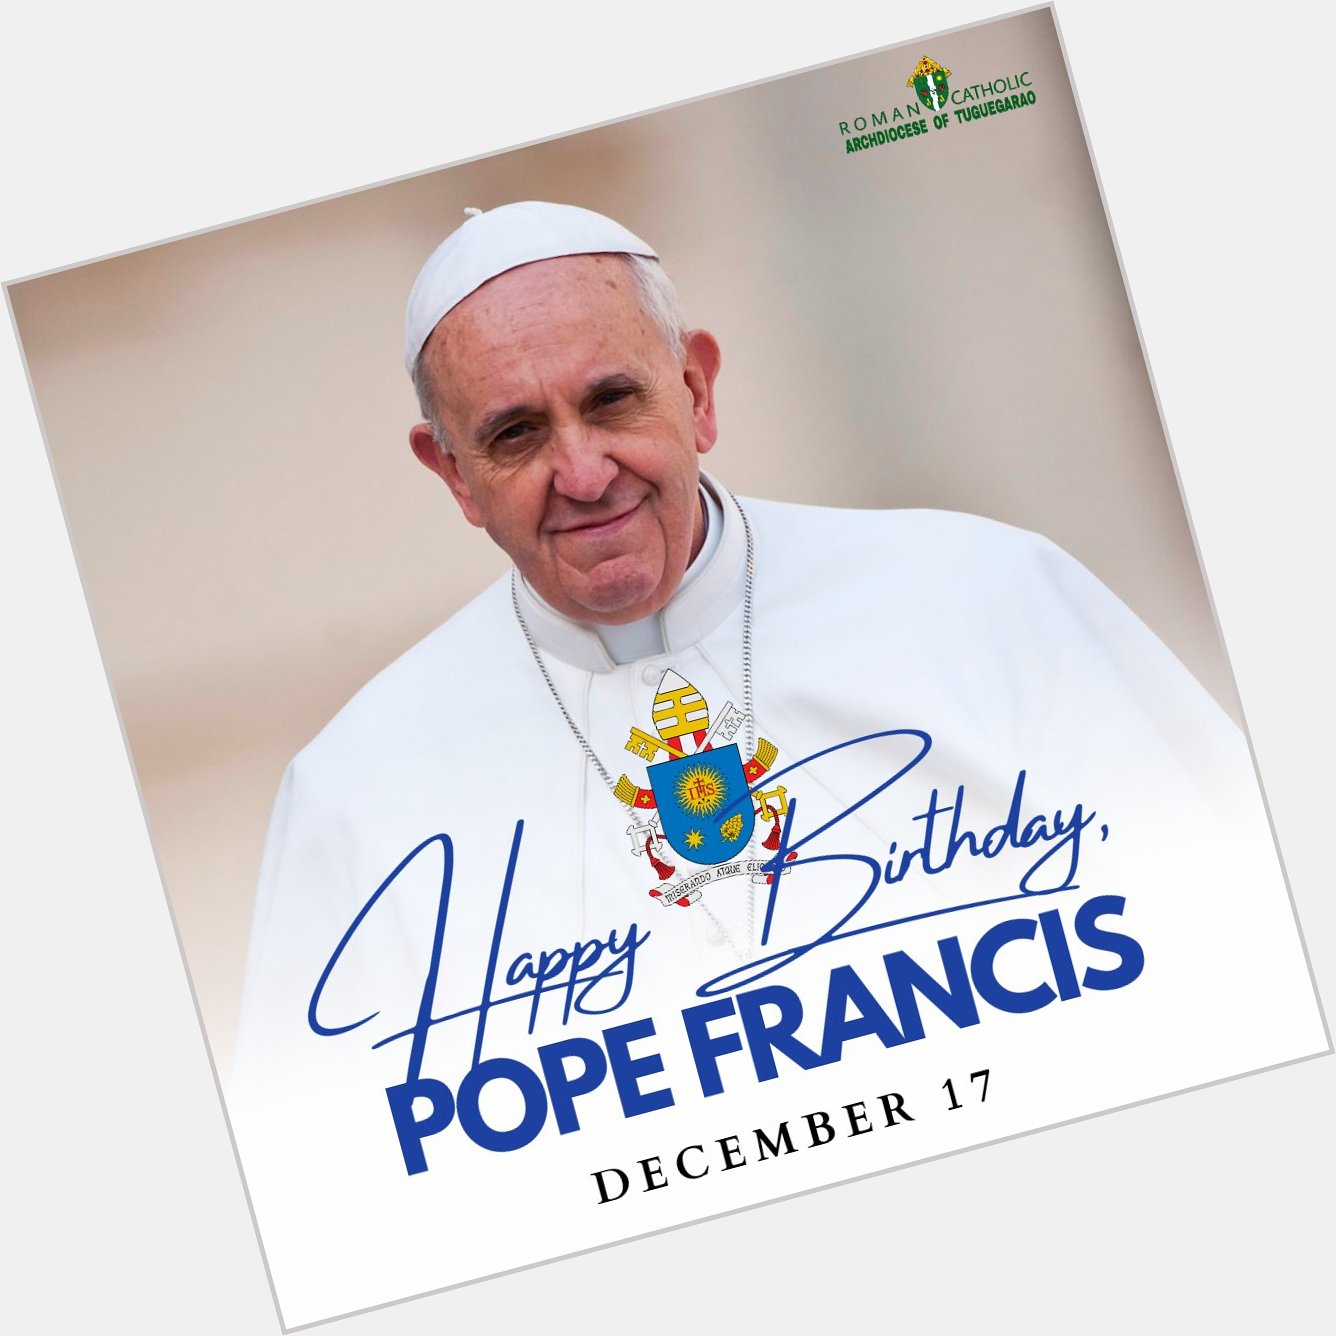 Happy Birthday, Pope Francis May God always bless you always.

Ad Multos Annos 